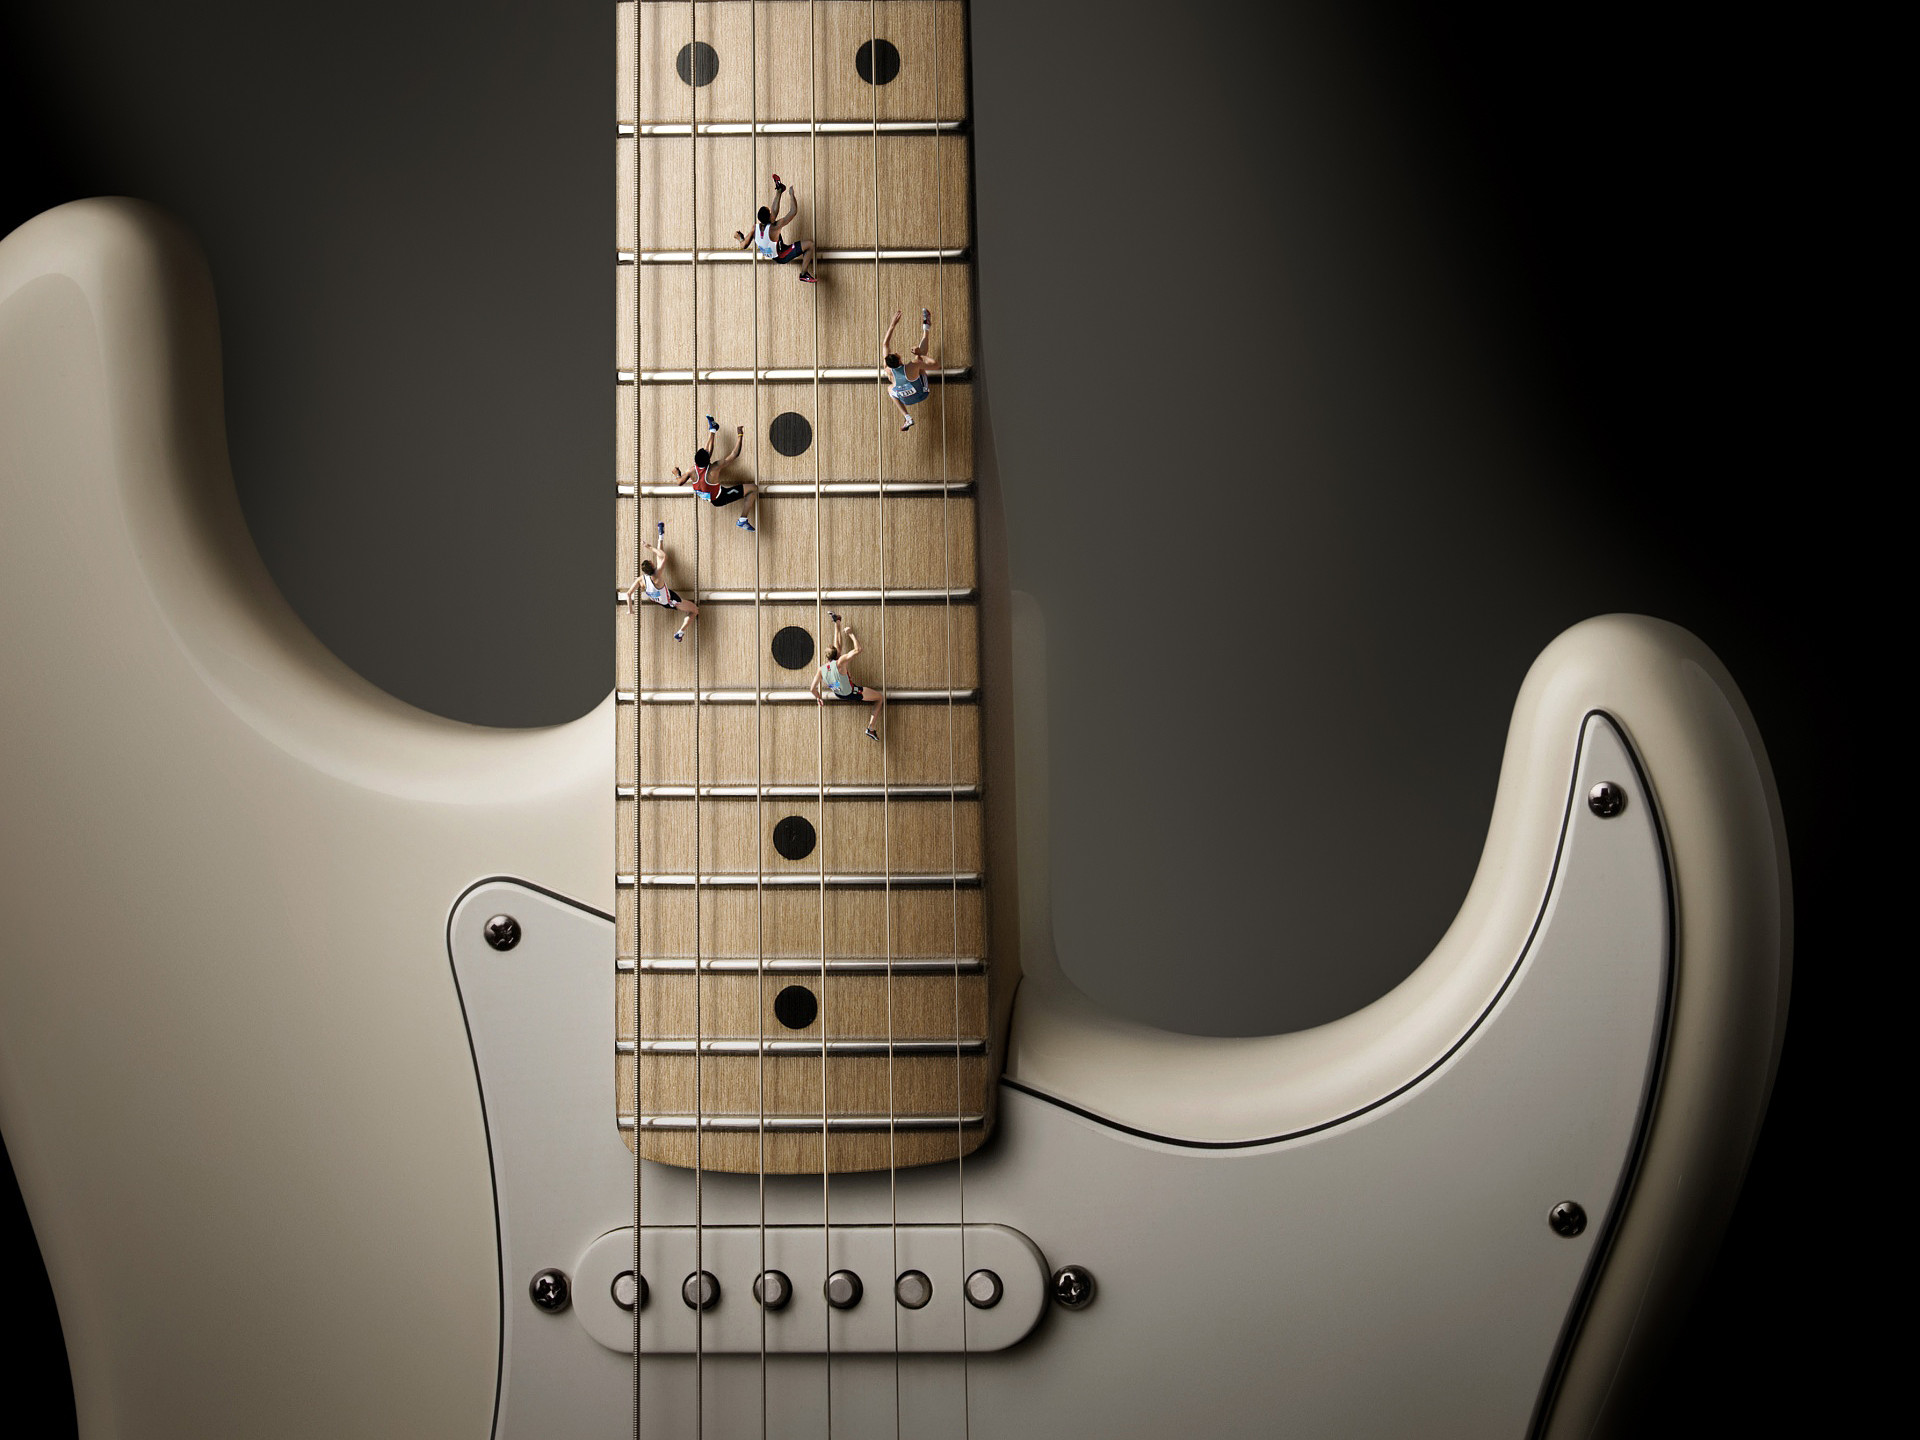 Iphone / Android / Smartphone Â - Fender Stratocaster Wallpaper Iphone , HD Wallpaper & Backgrounds